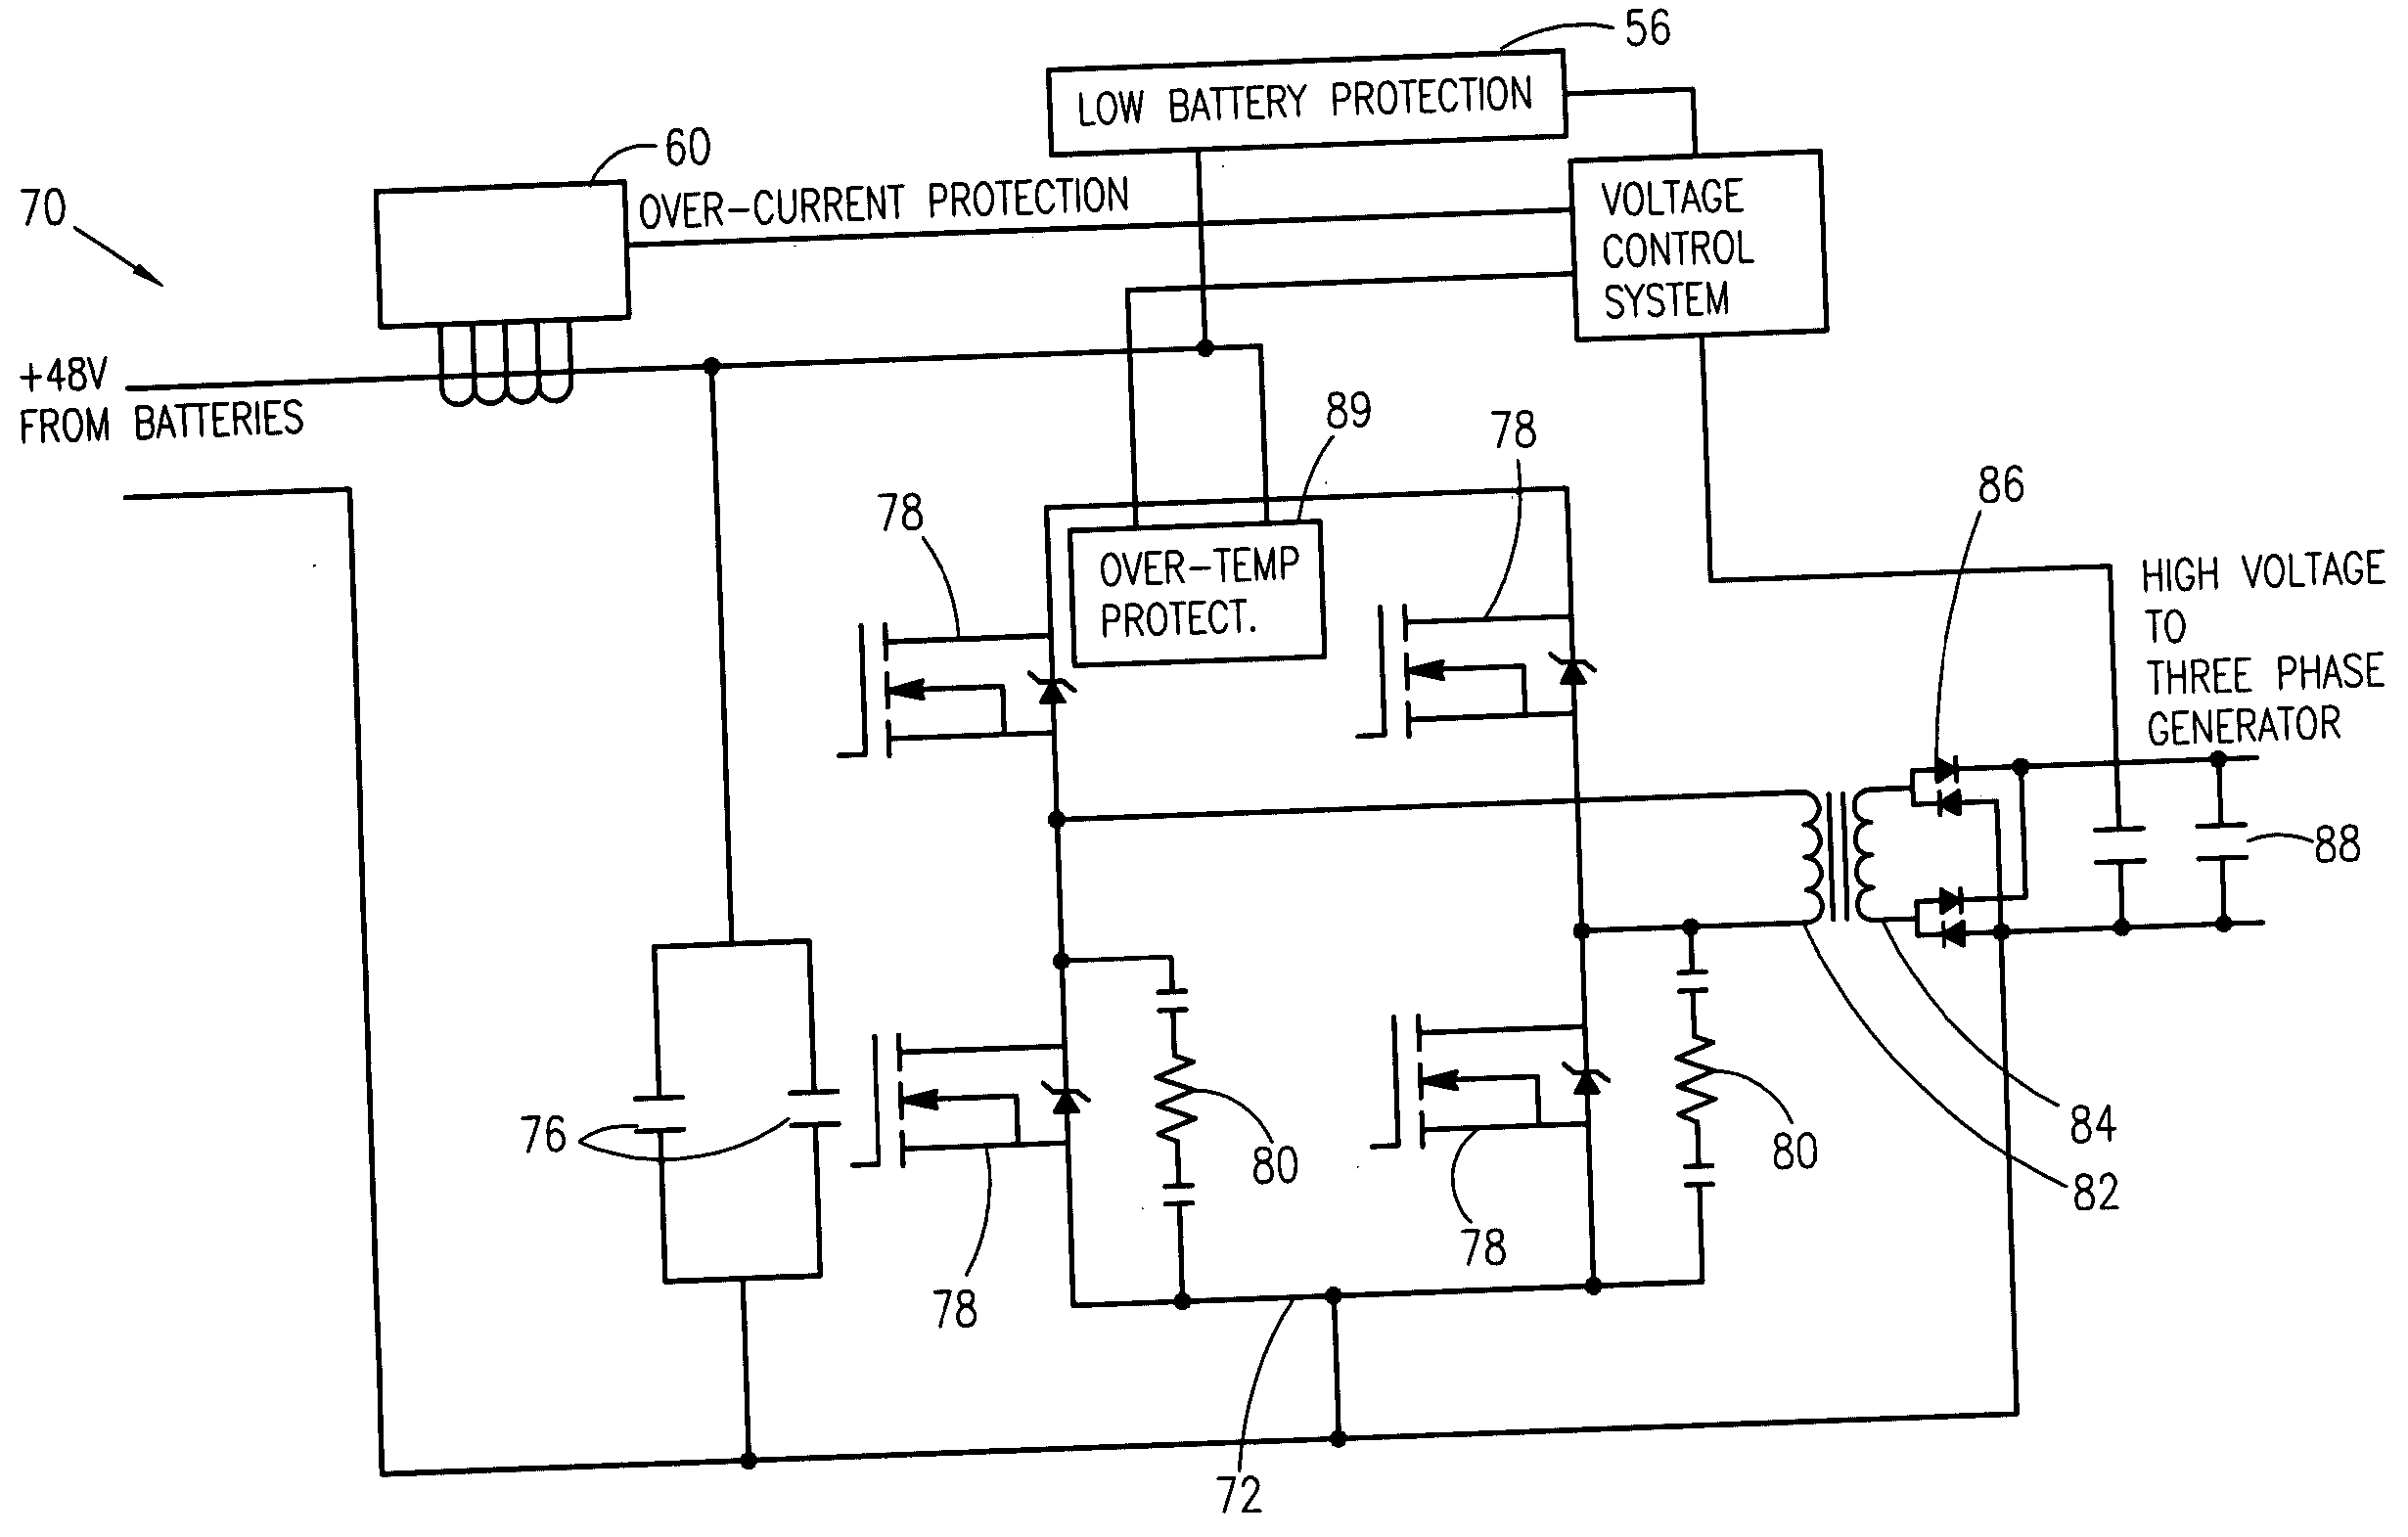 Back-up power system for a traction elevator